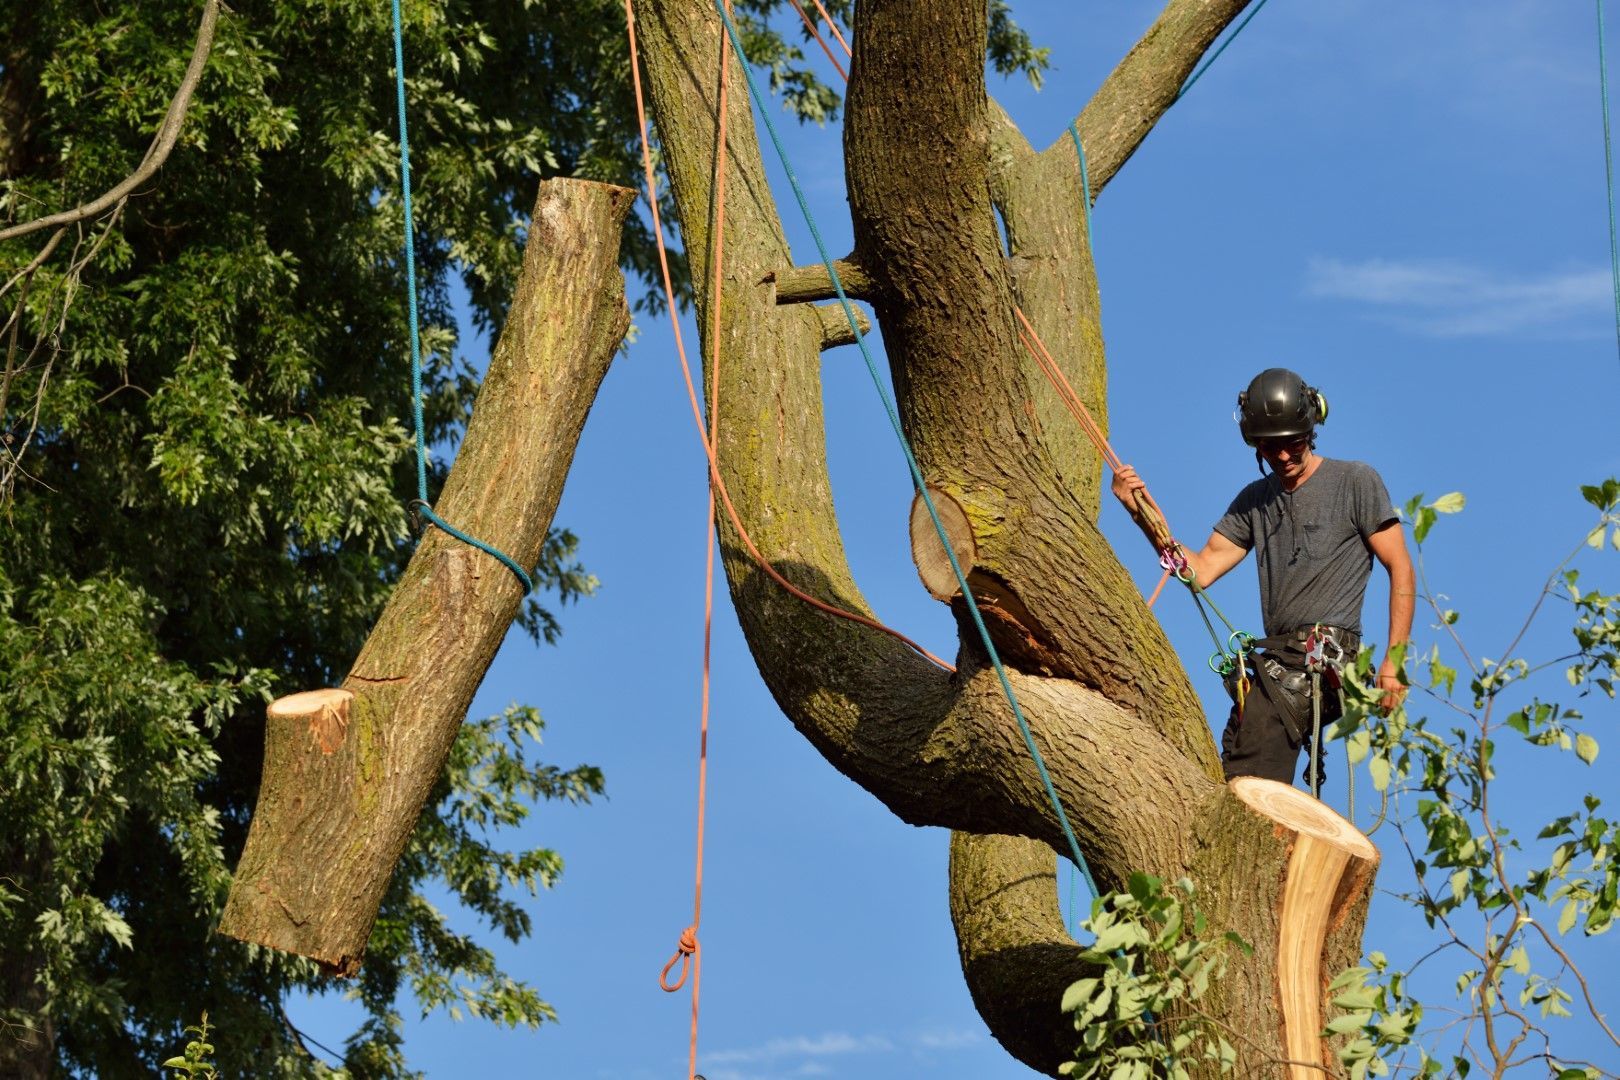 An image of Tree Removal & Stump Grinding in Washington, DC